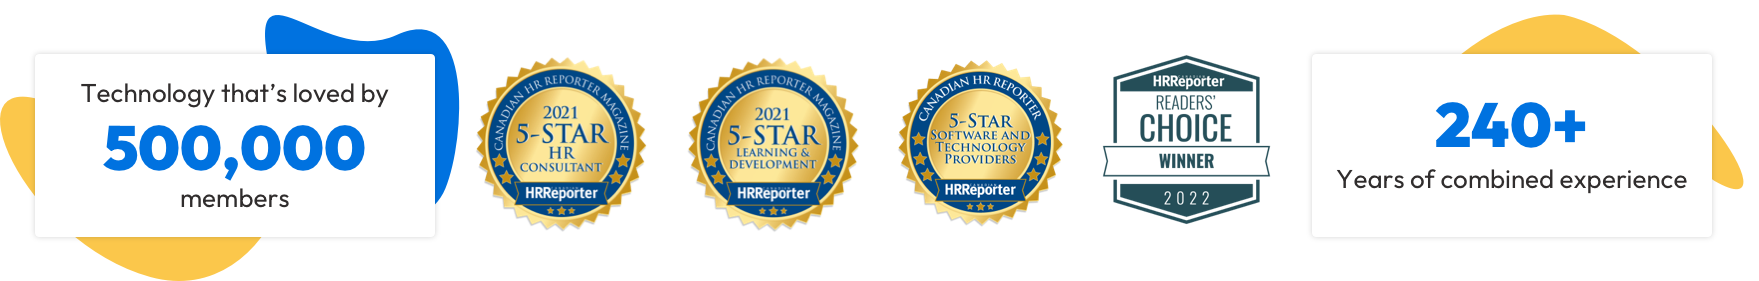 Technology that’s loved by 5000,000 members - CHRR 5-Star HR Consultant 2021 - CHRR 5-Star learning and Development - CHRR 5-Star Software and Technology Providers - CHRR Readers Choice 2022 winner - 240+ Years of combined experience